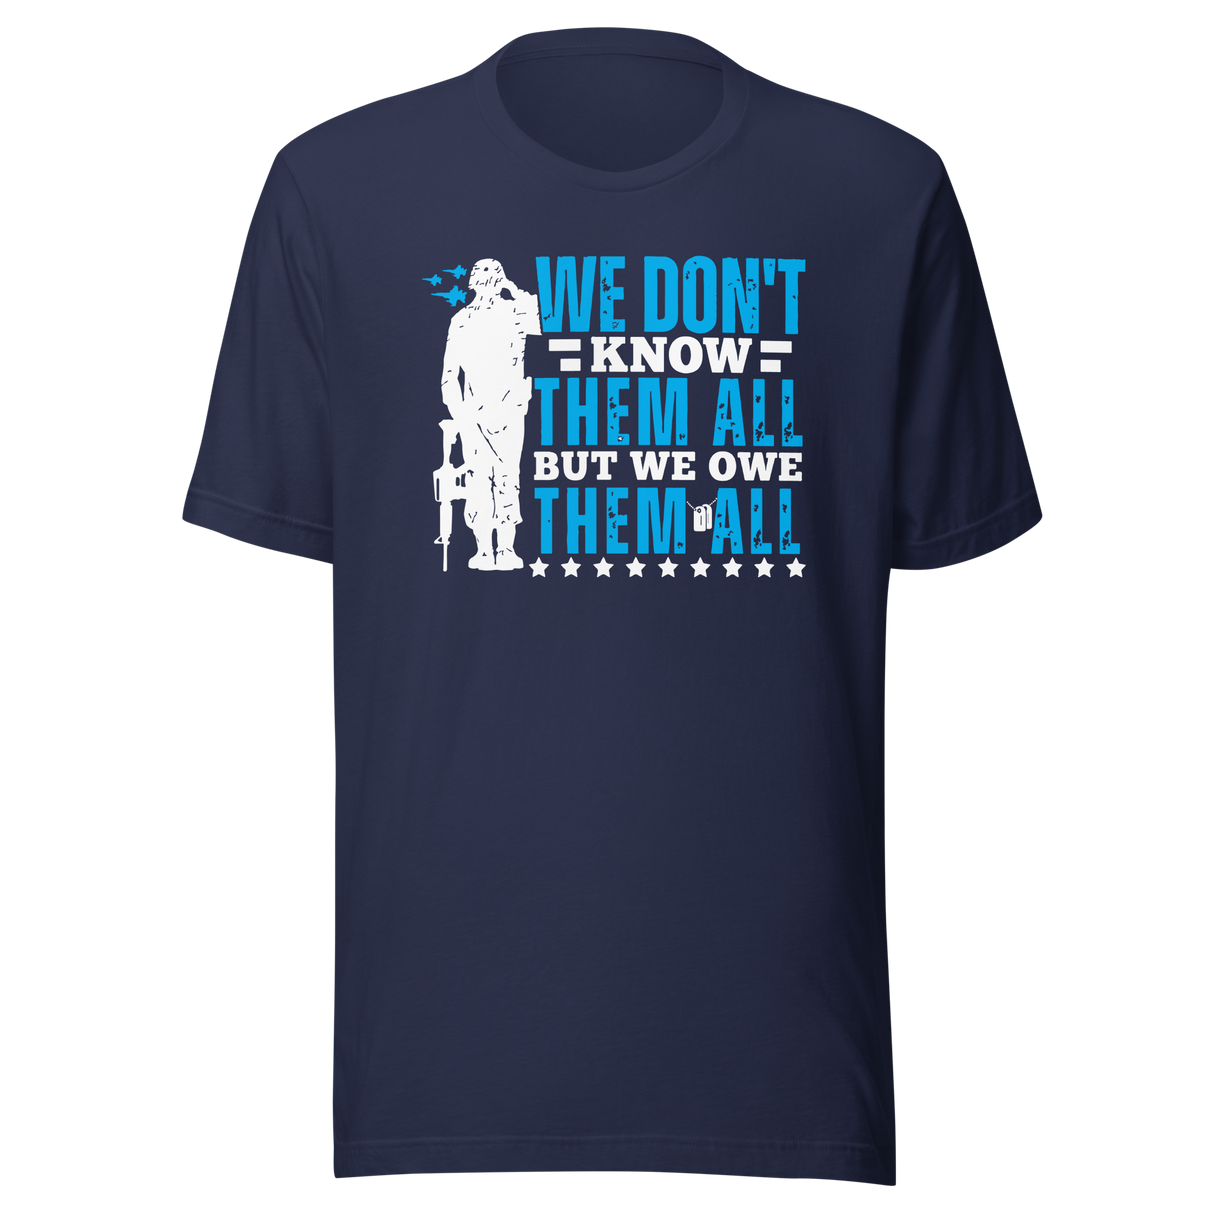 we-dont-know-them-all-but-owe-them-all-government-tee-veteran-t-shirt-government-tee-tribute-t-shirt-respect-tee#color_navy